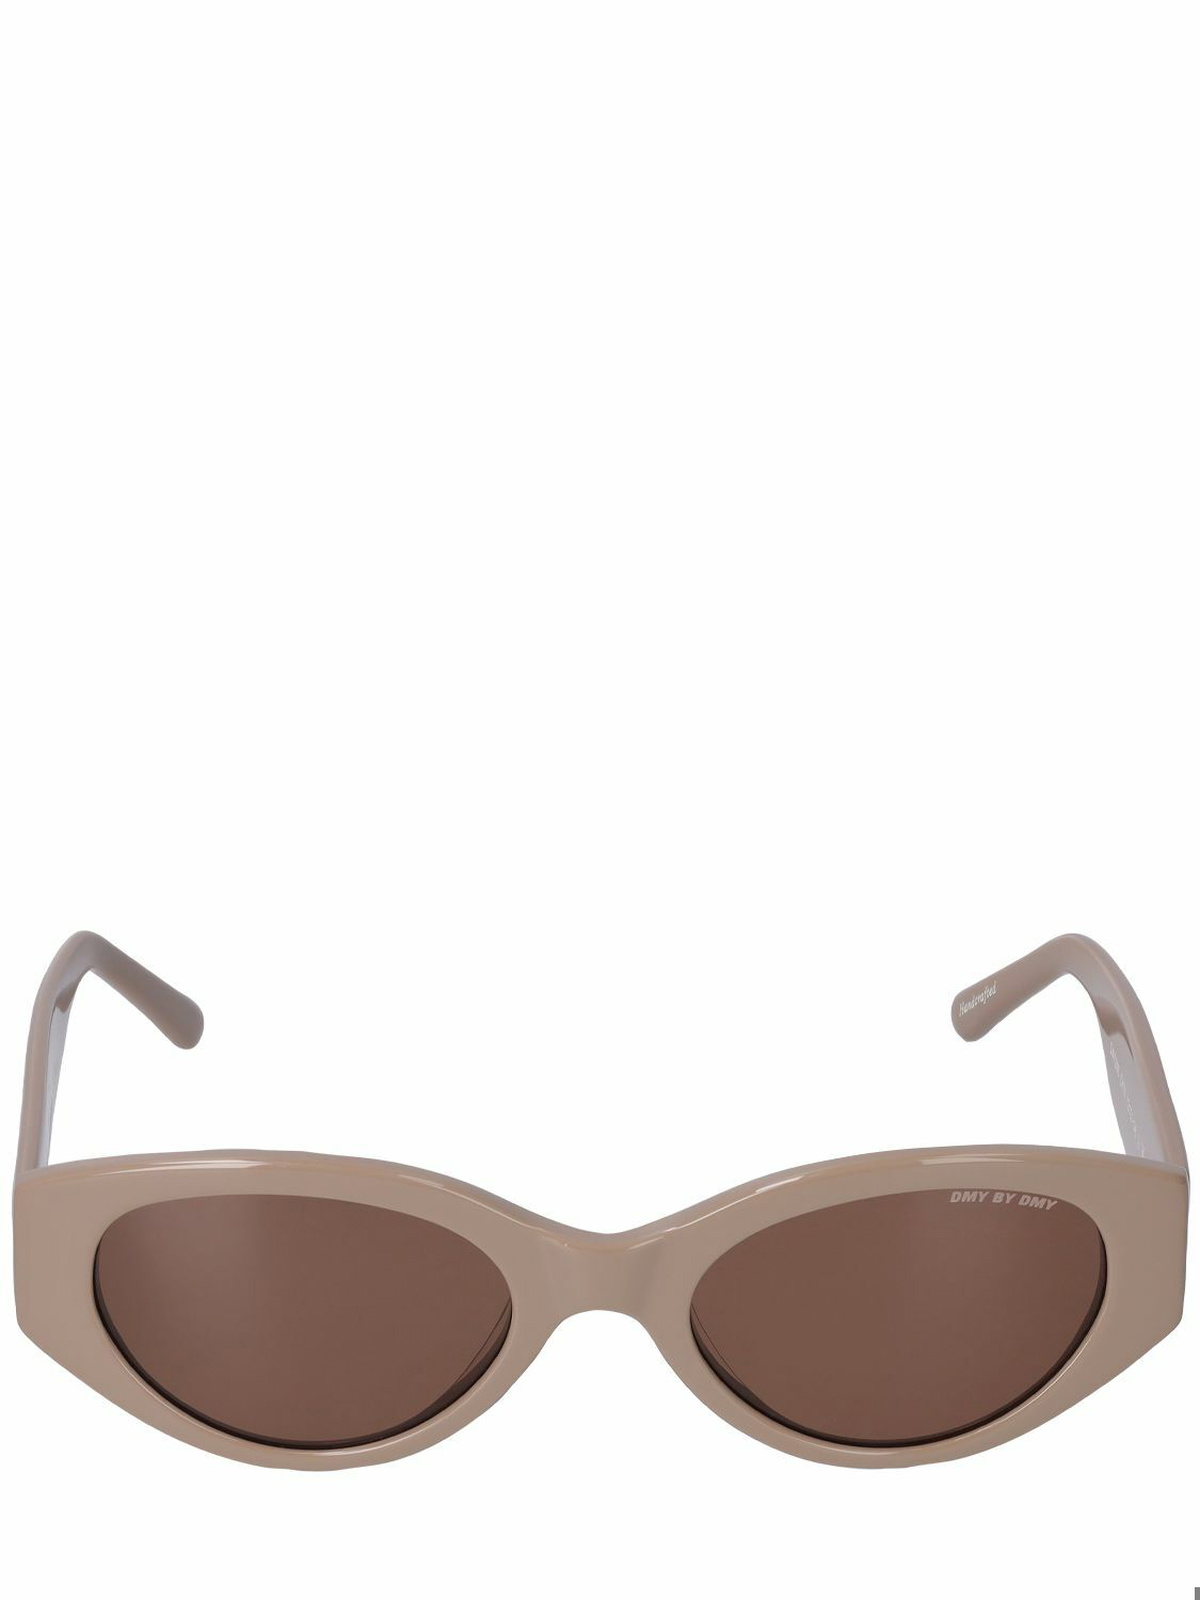 DMY BY DMY - Quin Round Acetate Sunglasses DMY BY DMY